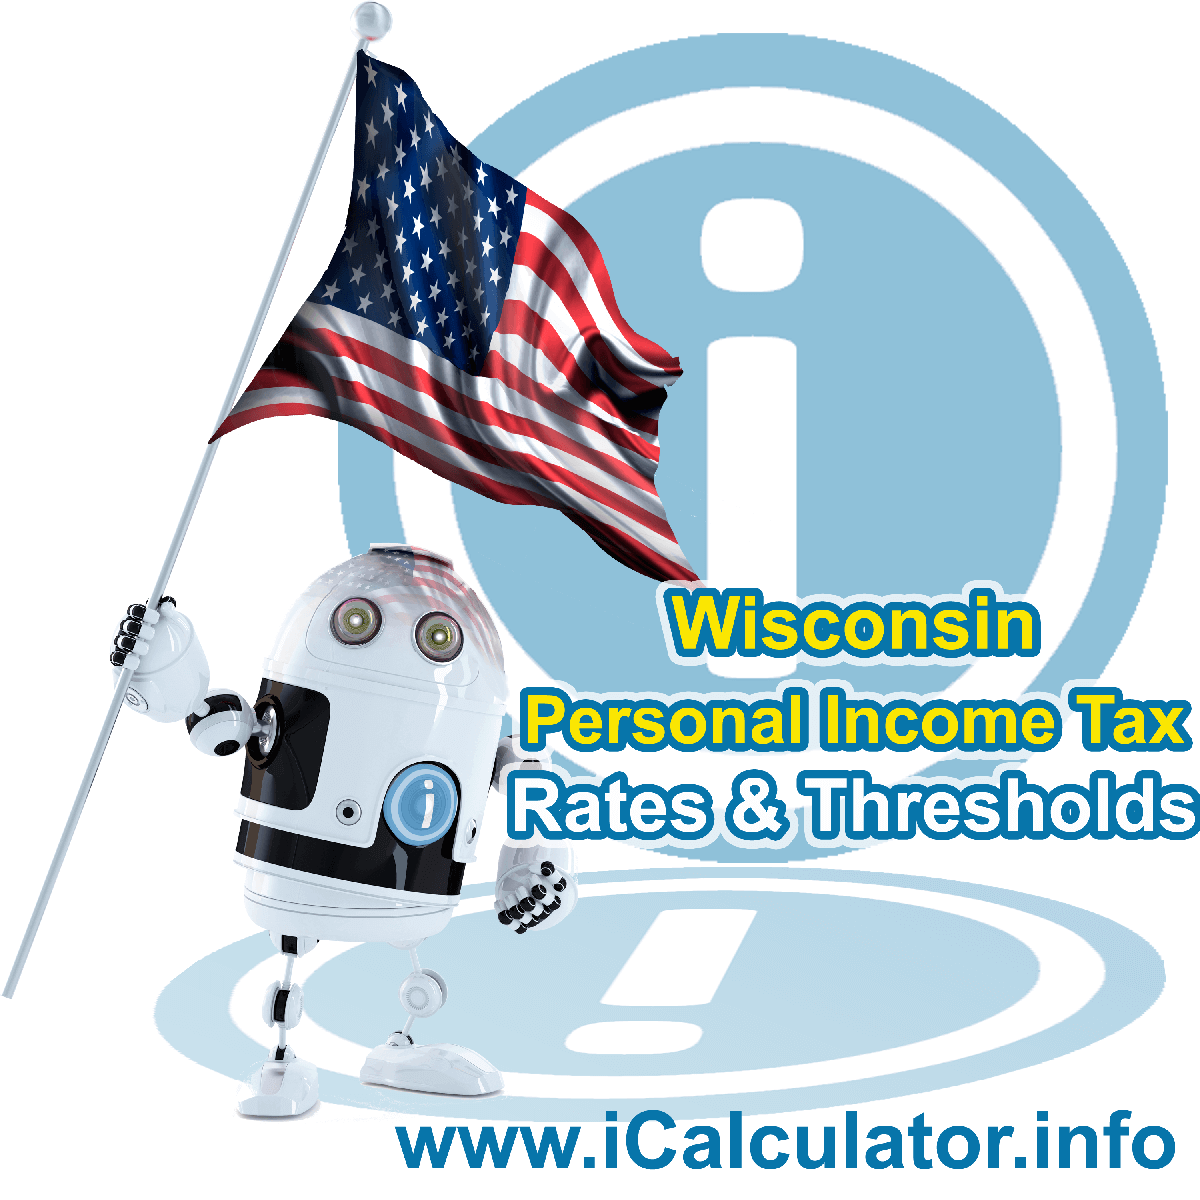 Wisconsin State Tax Tables 2013. This image displays details of the Wisconsin State Tax Tables for the 2013 tax return year which is provided in support of the 2013 US Tax Calculator